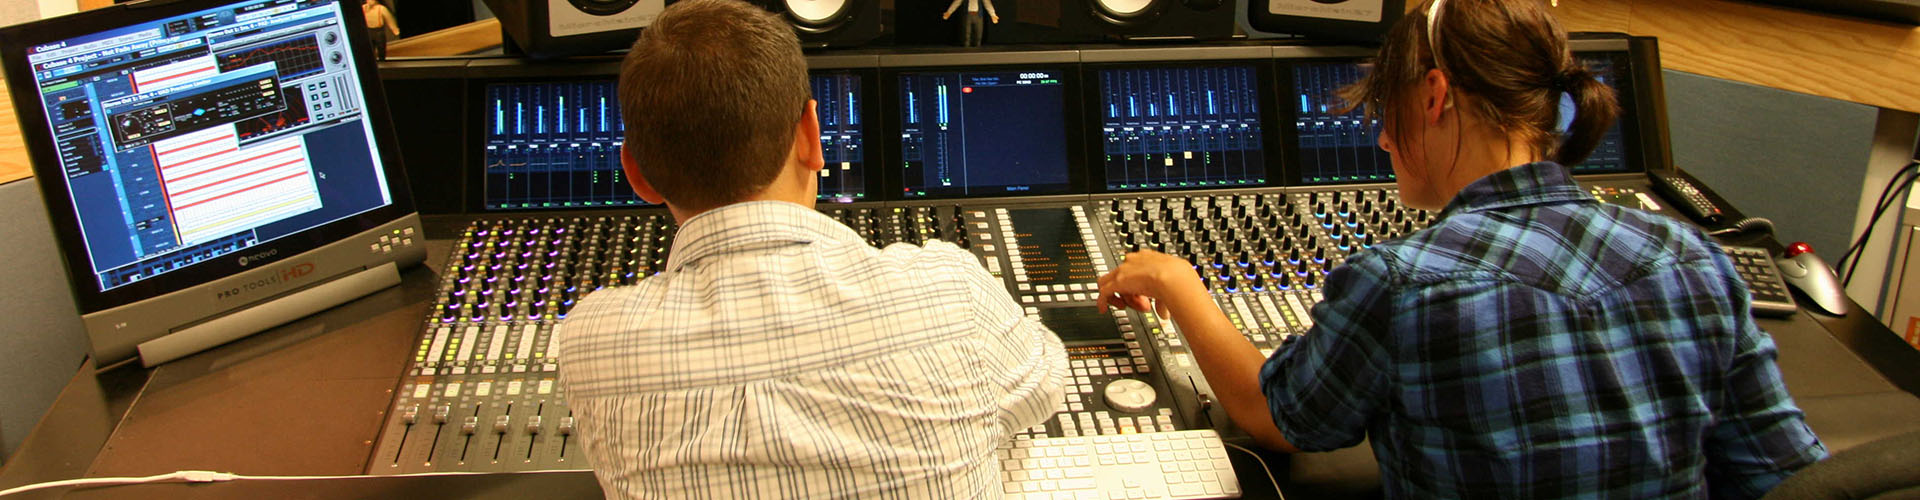 students working in a recording studio